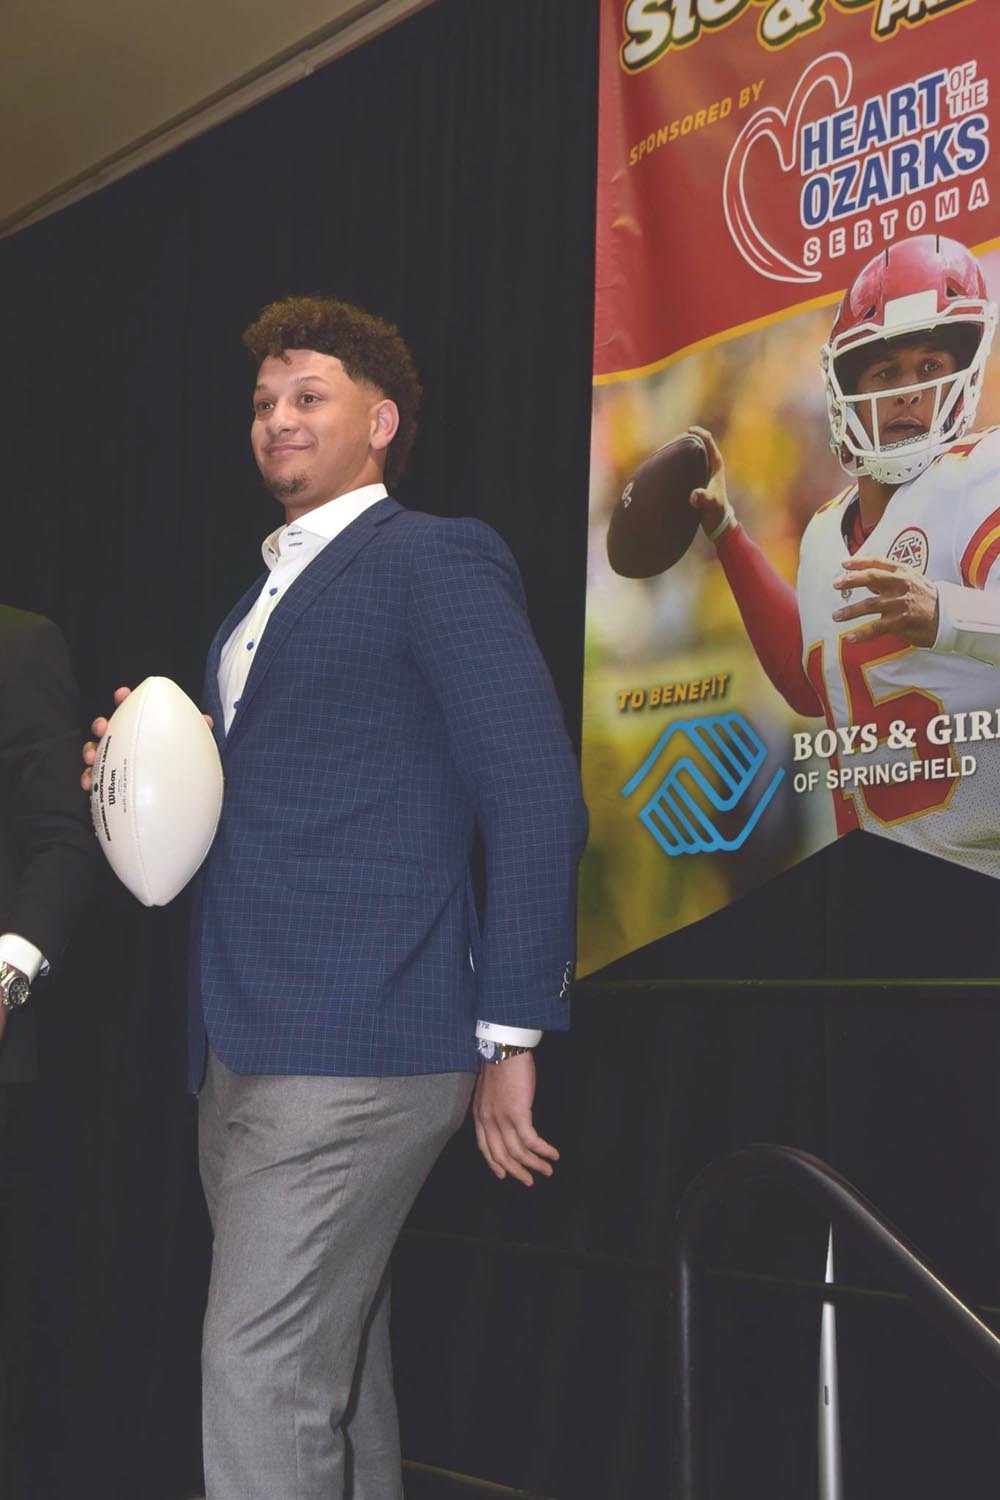 Mahomes Sets Another Record
Patrick Mahomes is the featured guest April 9 at the Boys and Girls Club of Springfield Inc.’s Steak & Steak Dinner. Roughly 1,250 people were in attendance at the University Plaza Convention Center. Officials say the preliminary amount raised was $400,000, a record for the 23rd annual event.